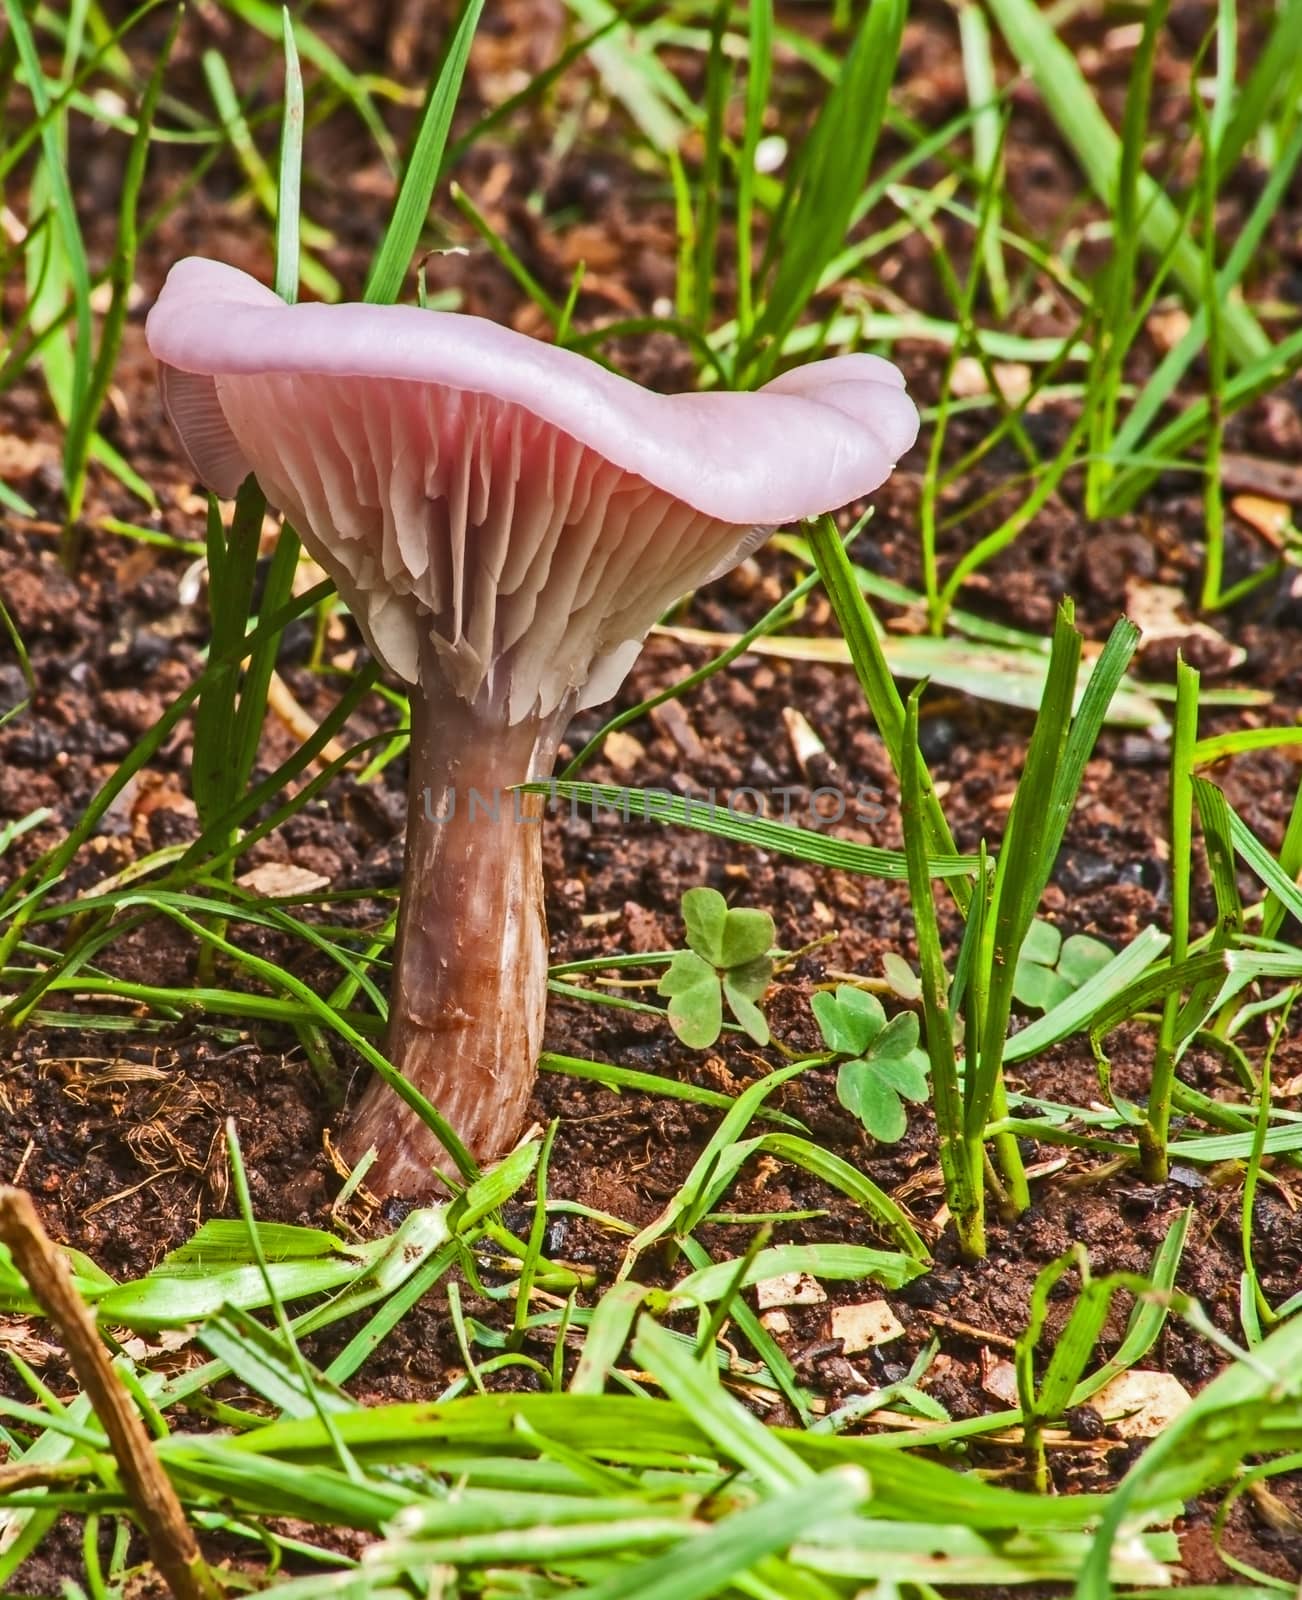 Wild pink mushroom in new growth of grass after good rain.